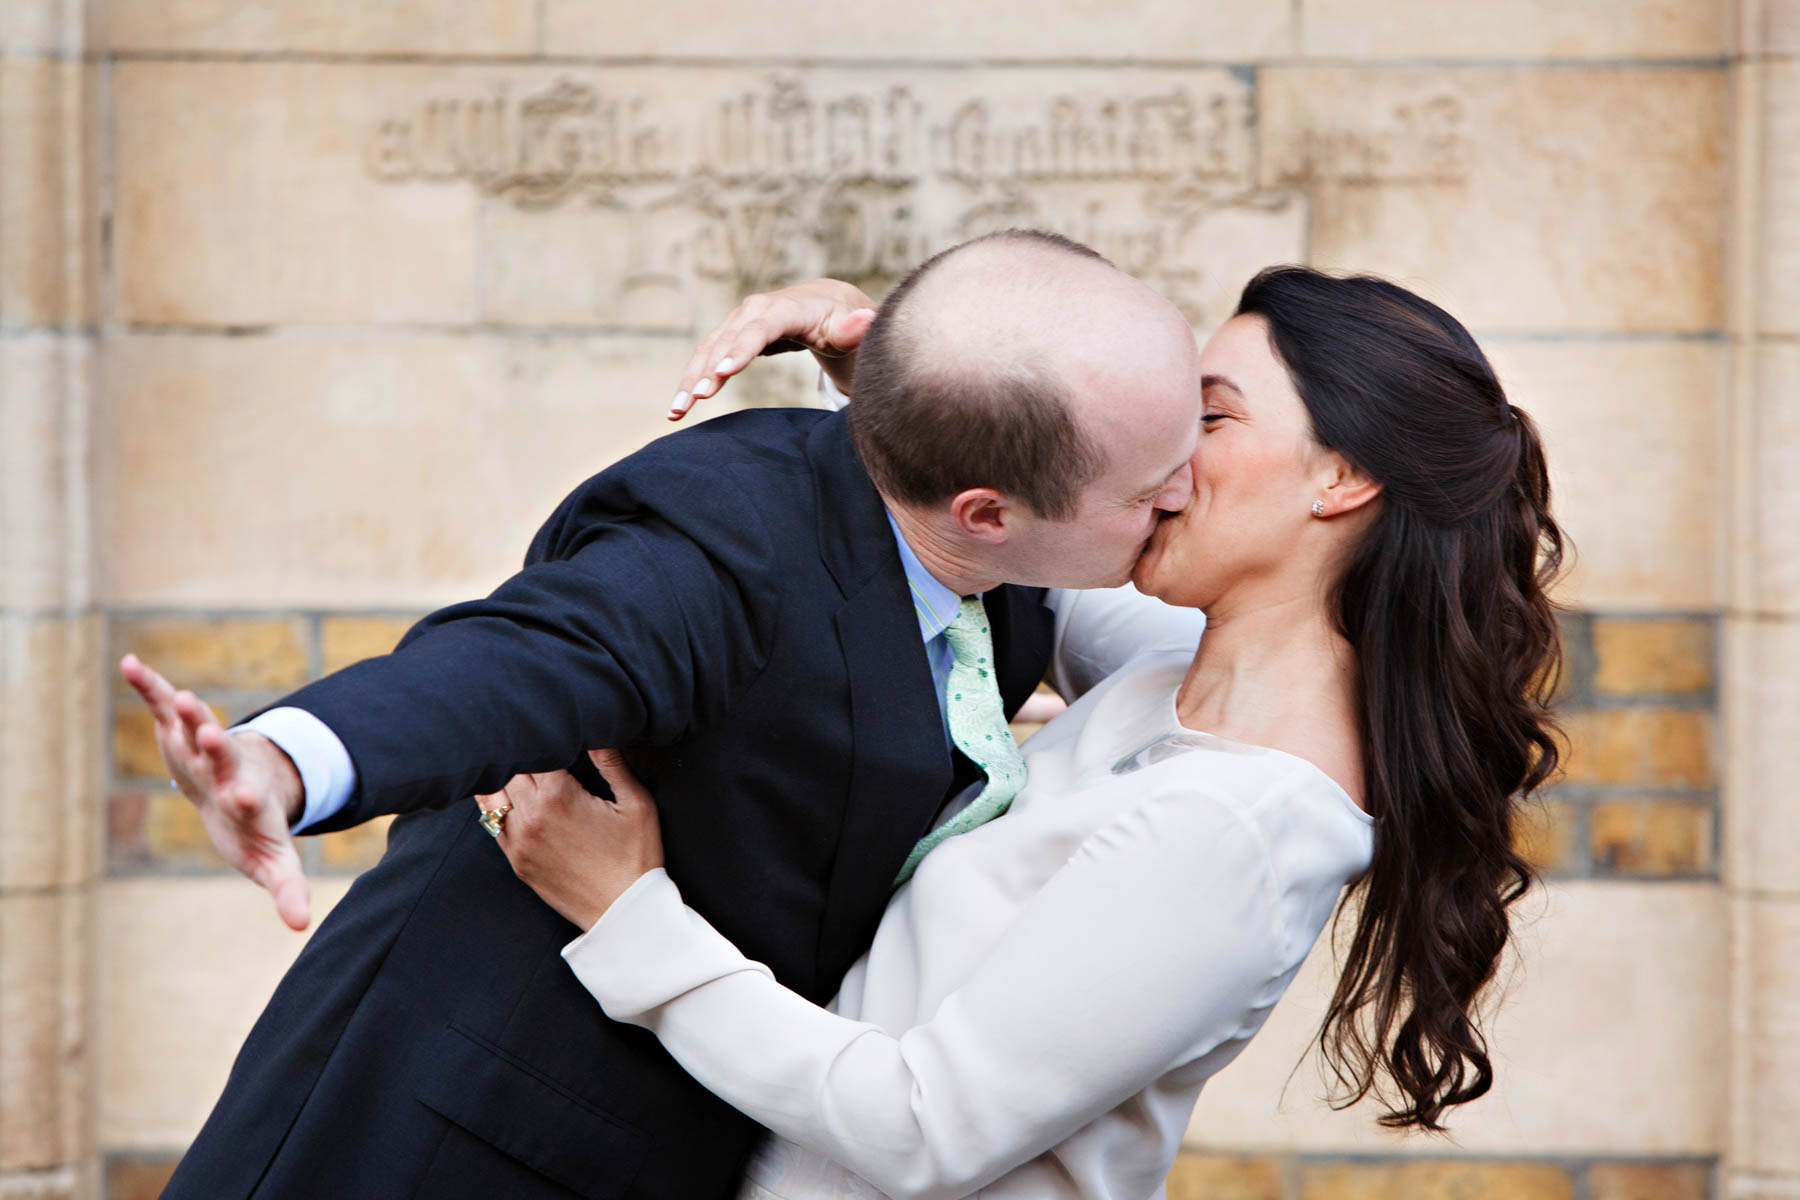 A bride and groom have fun kissing and fooling around during their relaxed informal wedding portraits, ahead of getting married at Chelsea Old Town Hall later on in the day.